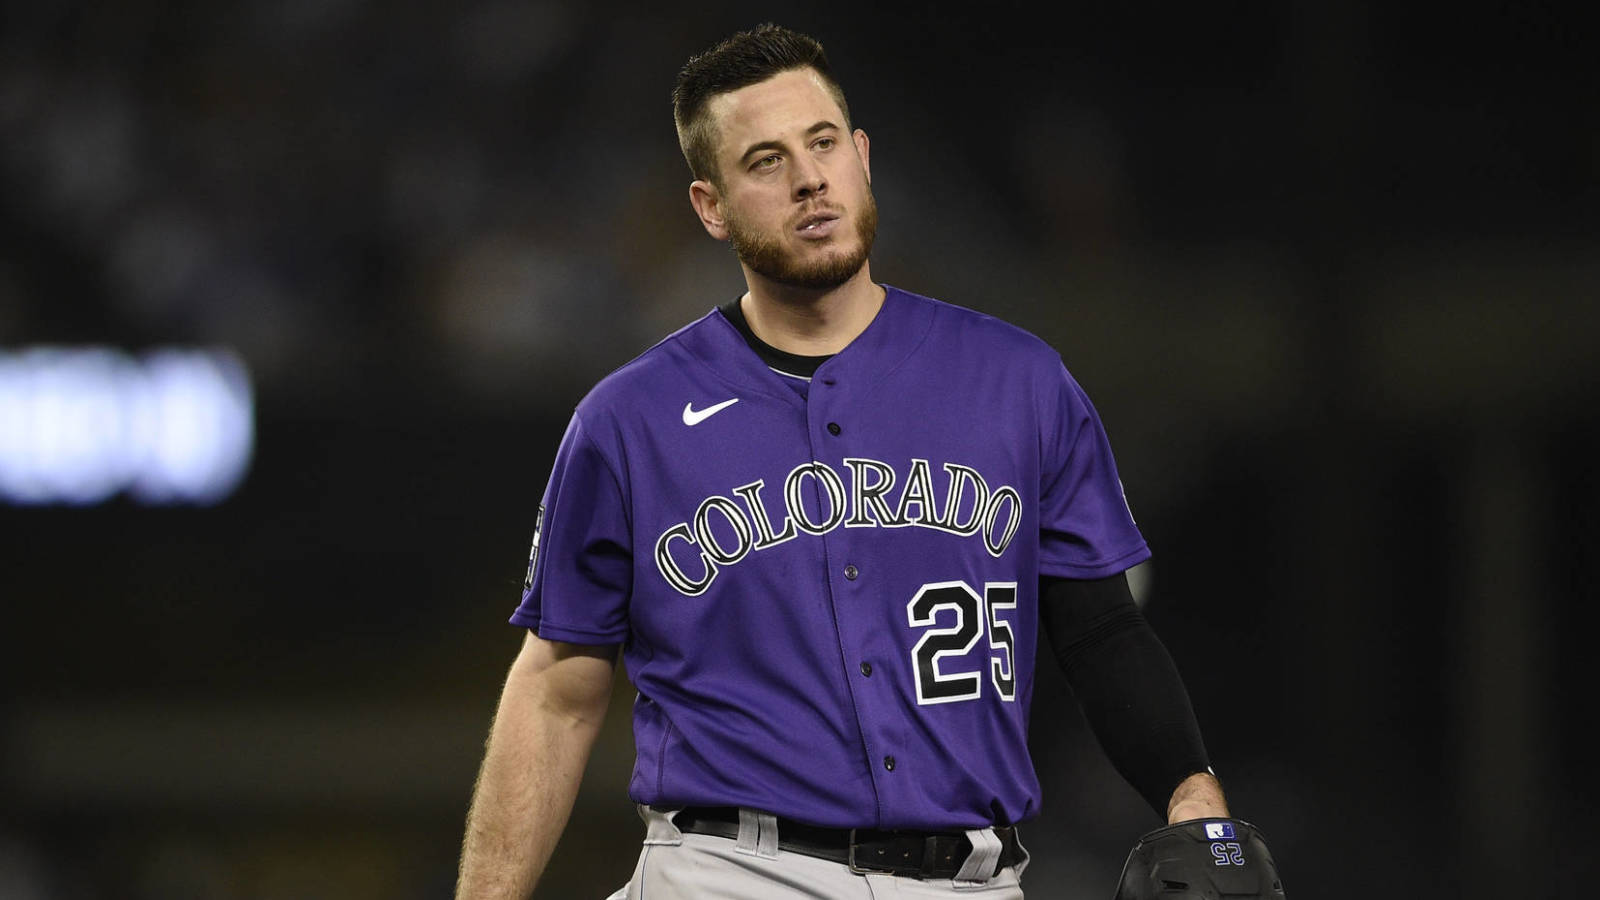 CJ Cron is a Coors demon. If the Rockies trade him away, the new